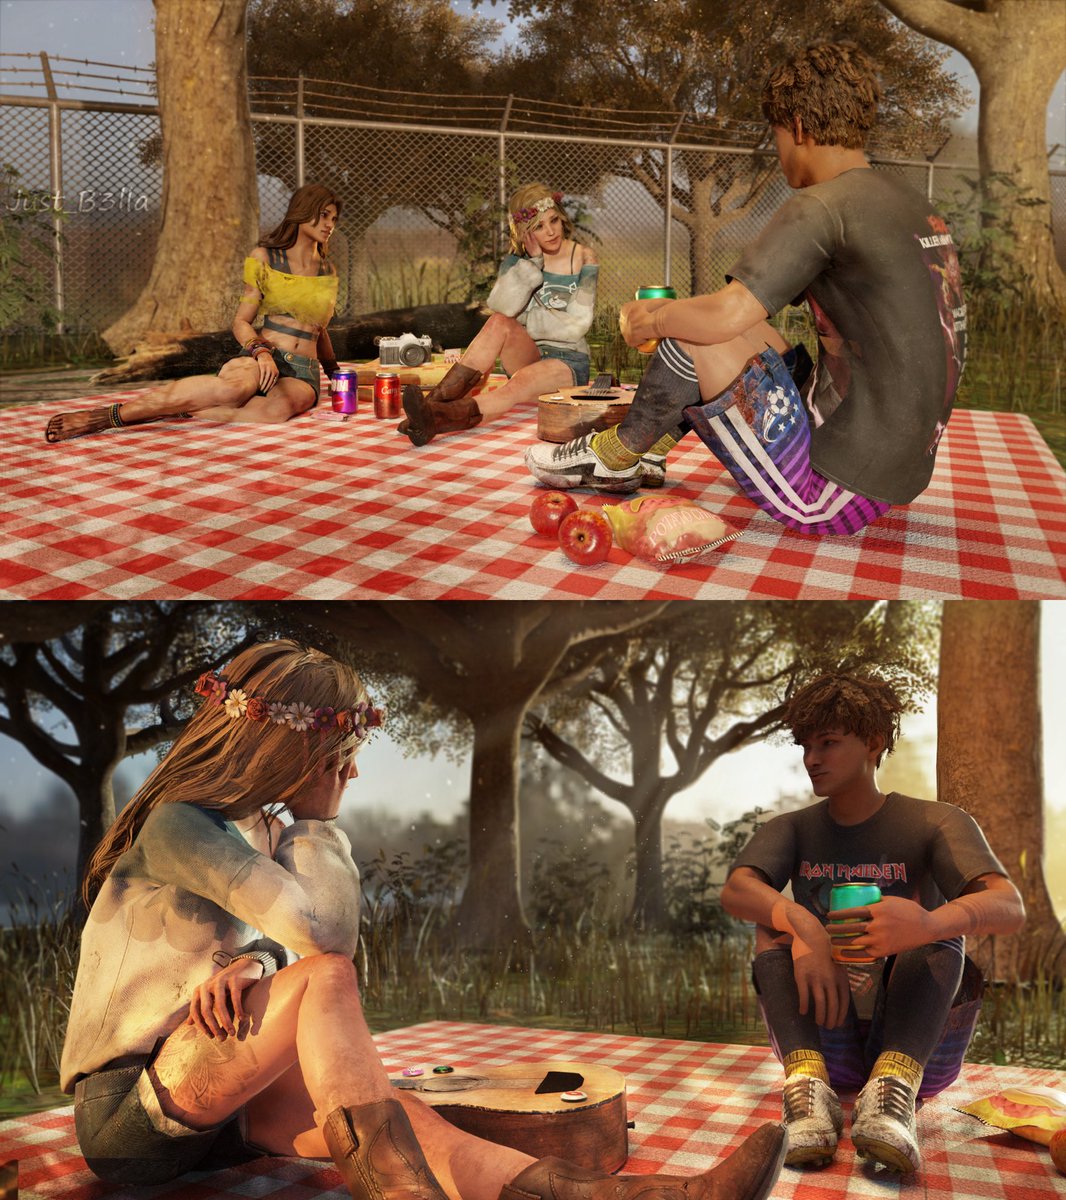 Nice day in the sun ☀️ 

Thalita decided to have a picnic and invite her brother and friend. Something seems to be happening between them…

#DeadbyDaylight #dbdfanart #b3d #dbdartwork #dbdart #blender3d #RenatoLyra #ThalitaLyra #KateDenson #dbd